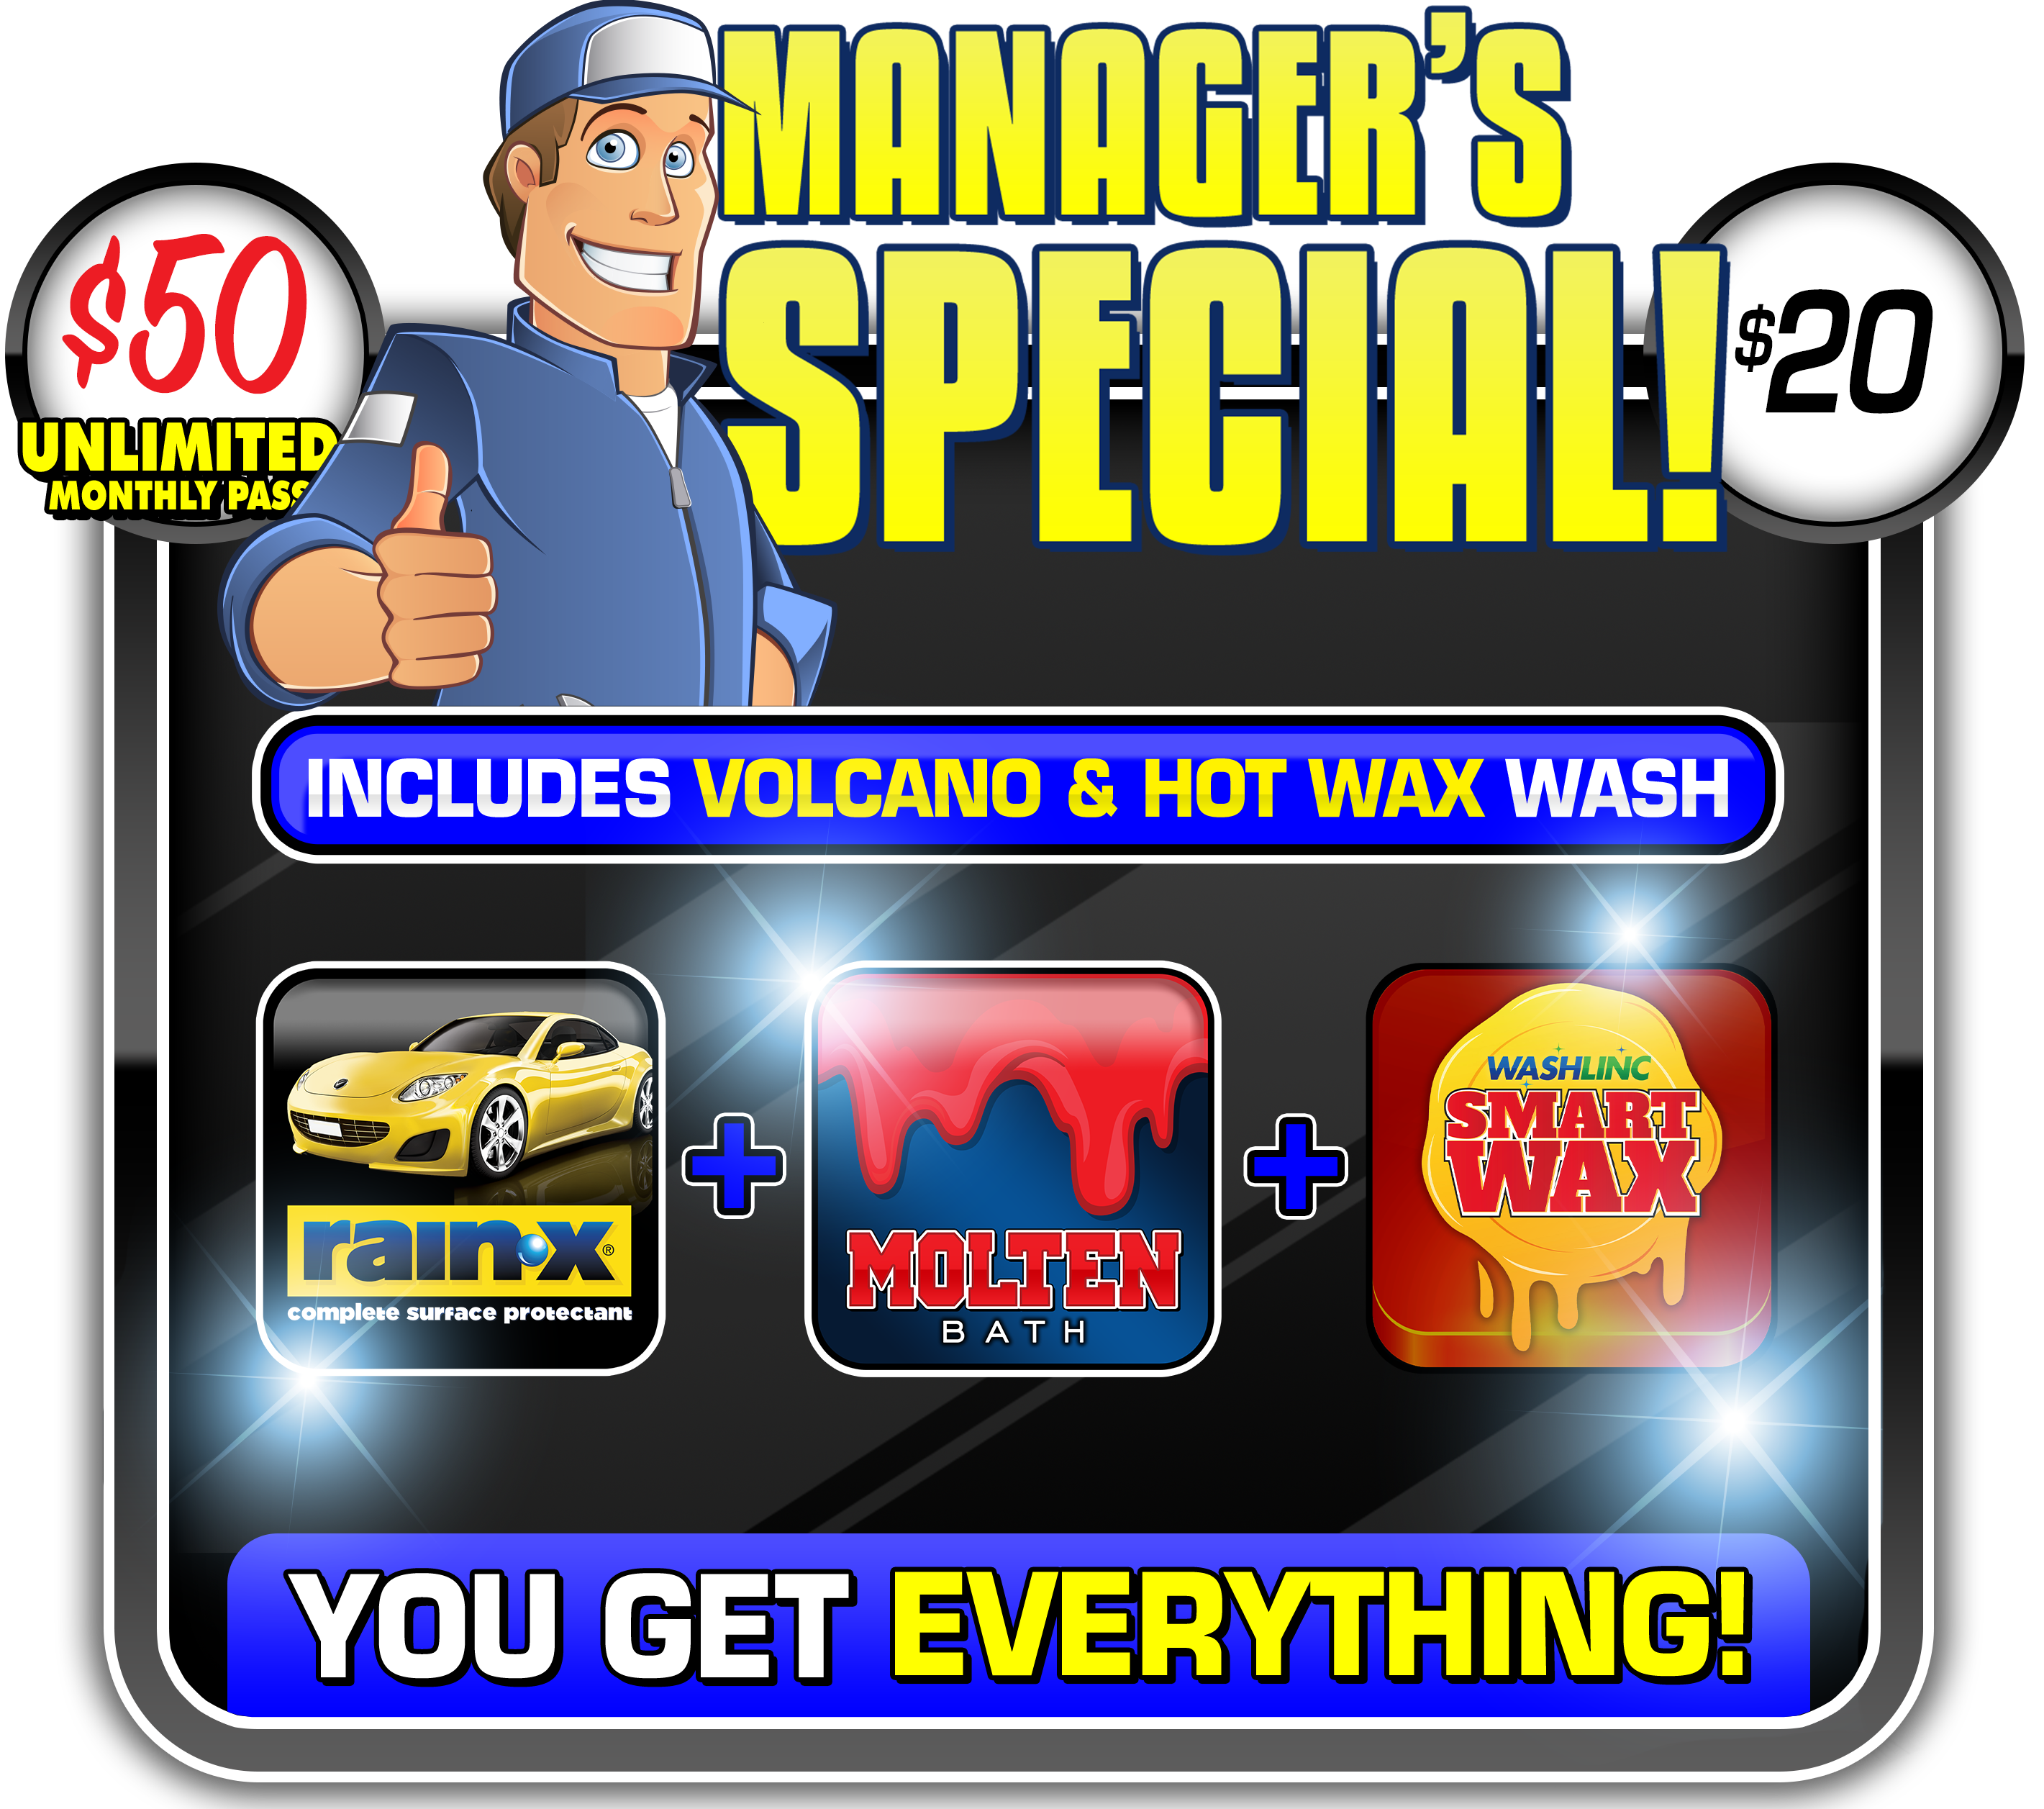 Unlimited Managers Special